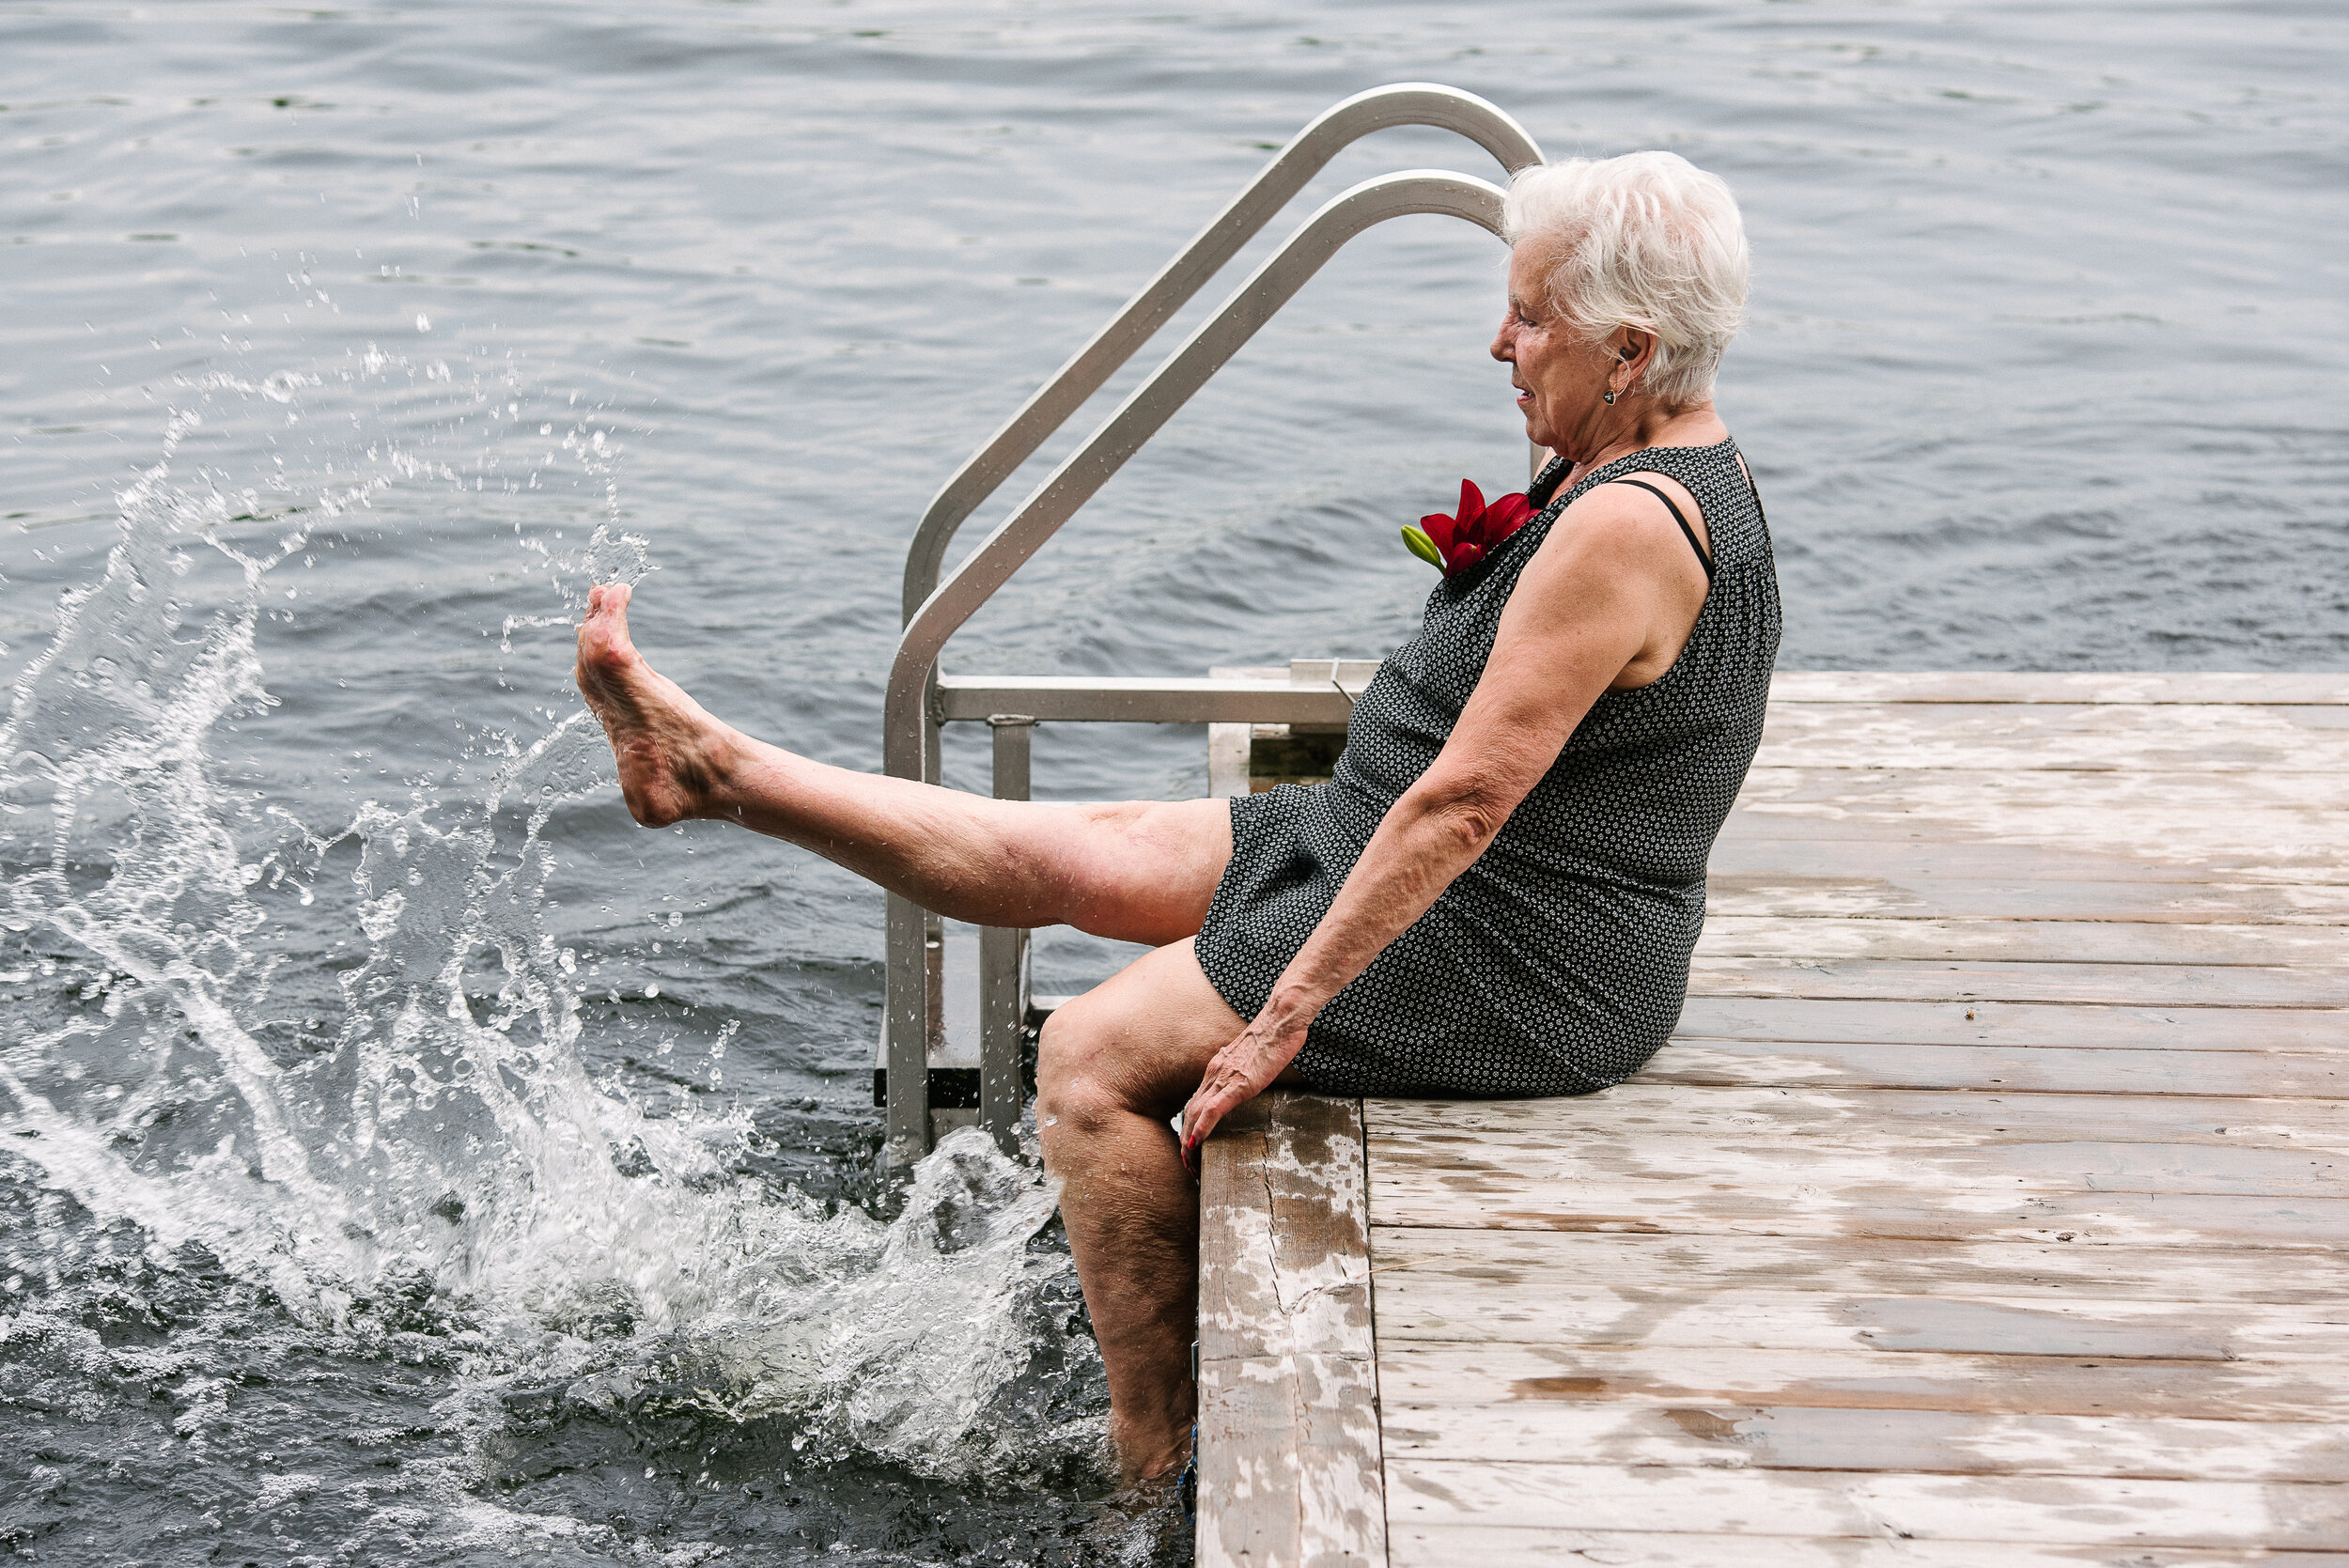 Older guest kicking and splashing her legs in the lake